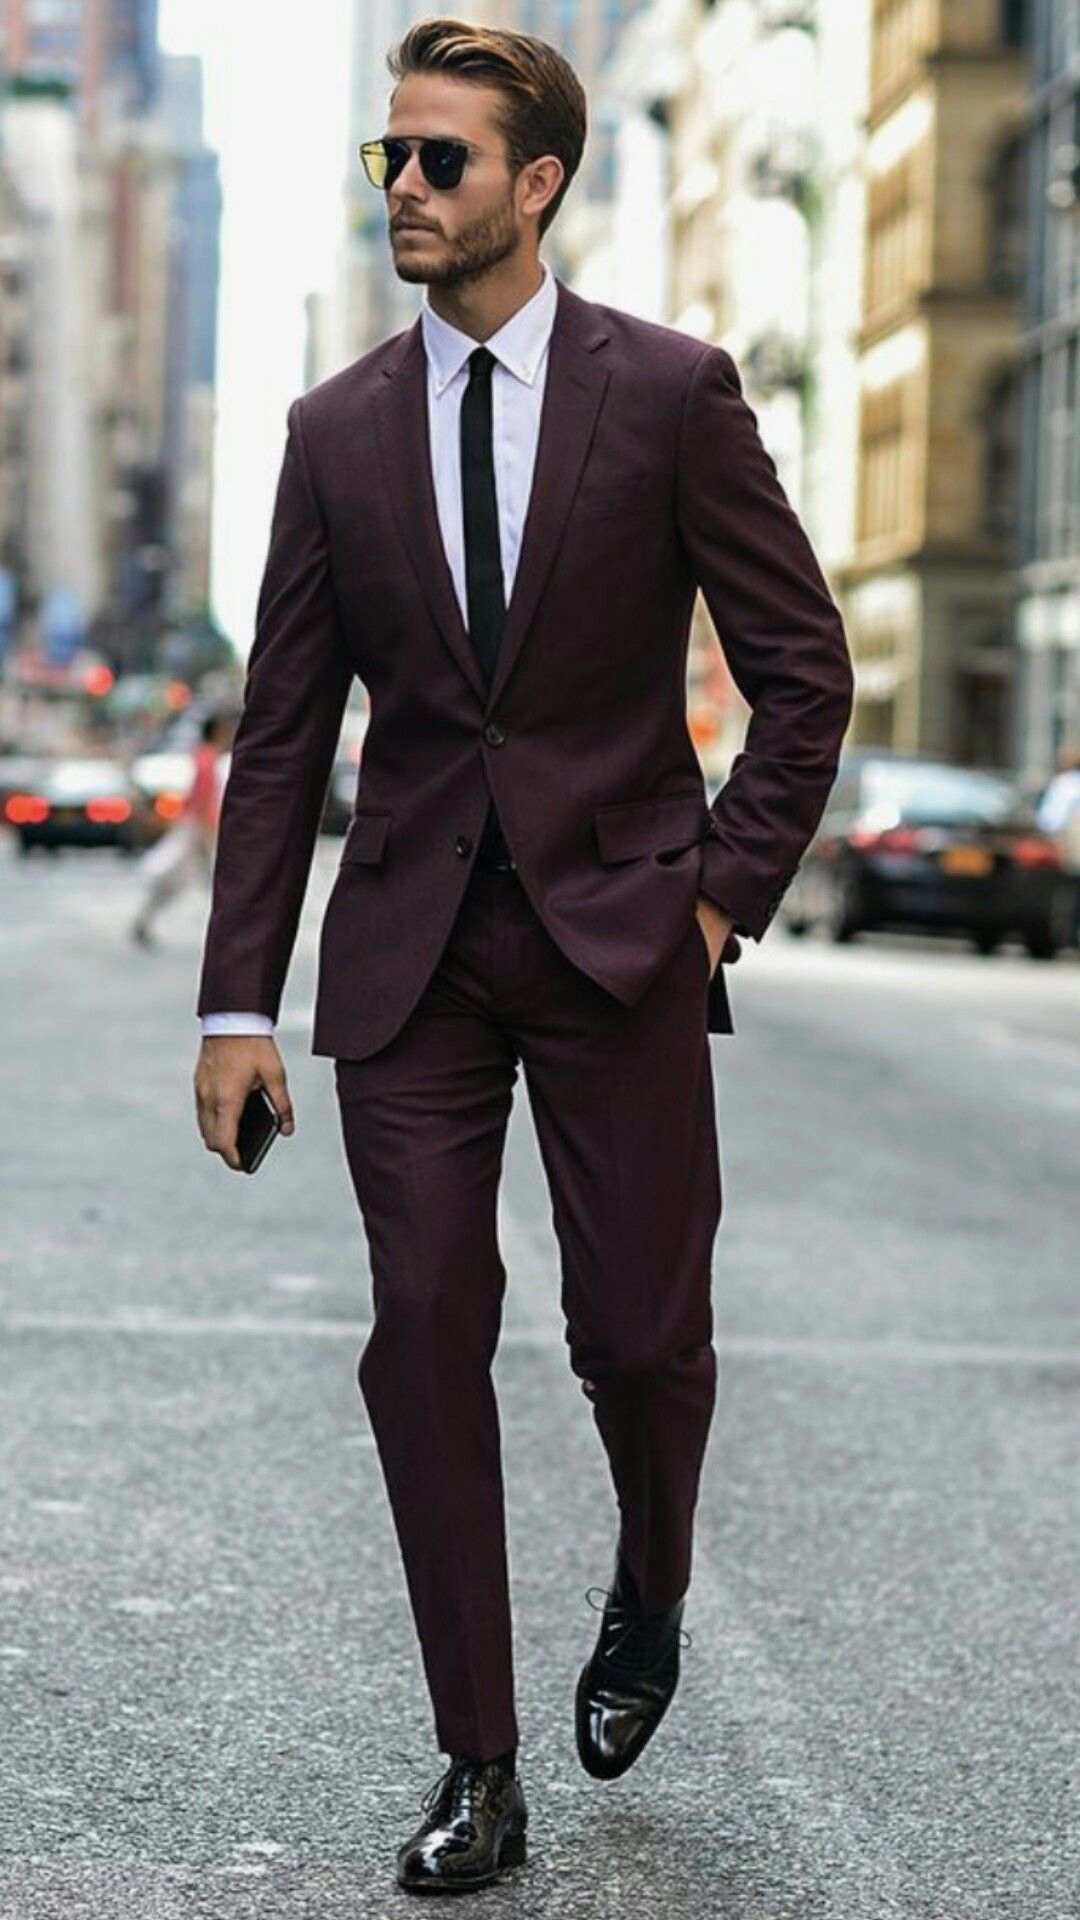 burgundy suit, white shirt, black oxford shoes, and black tie